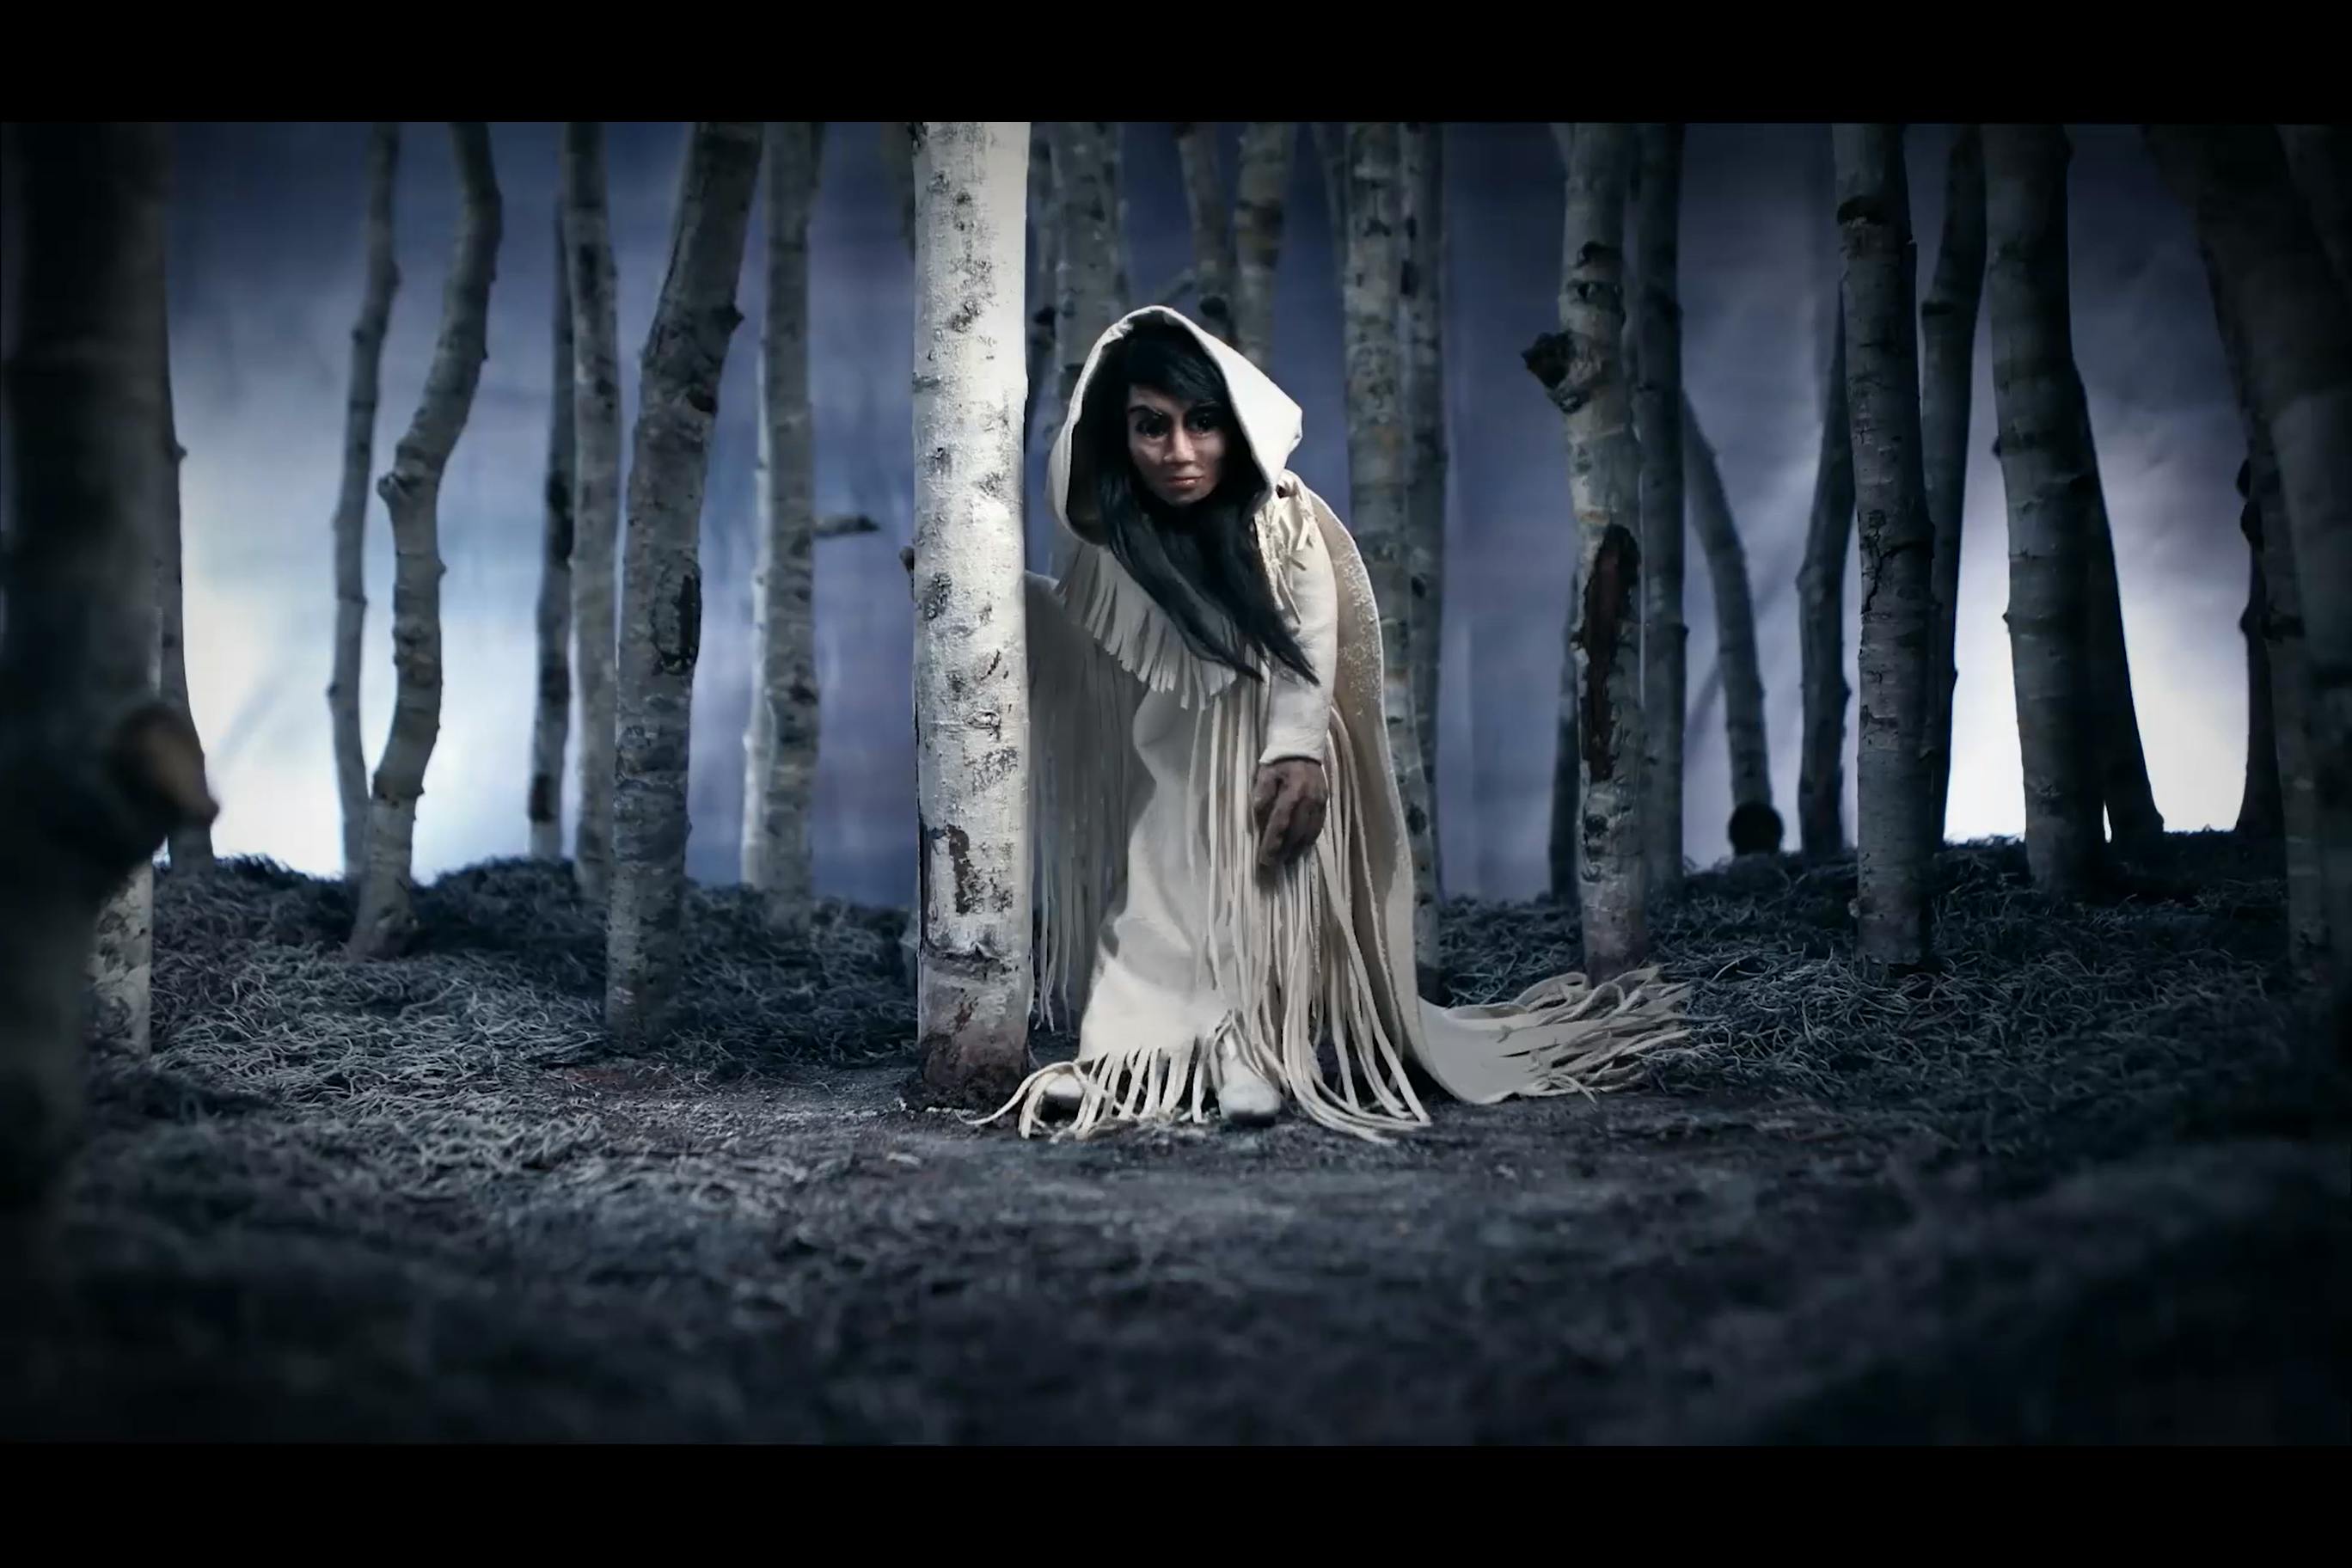 Image of  awoman in a white robe with tassels down her front stands by a birch tree and looking past the camera. The scene is in a forest